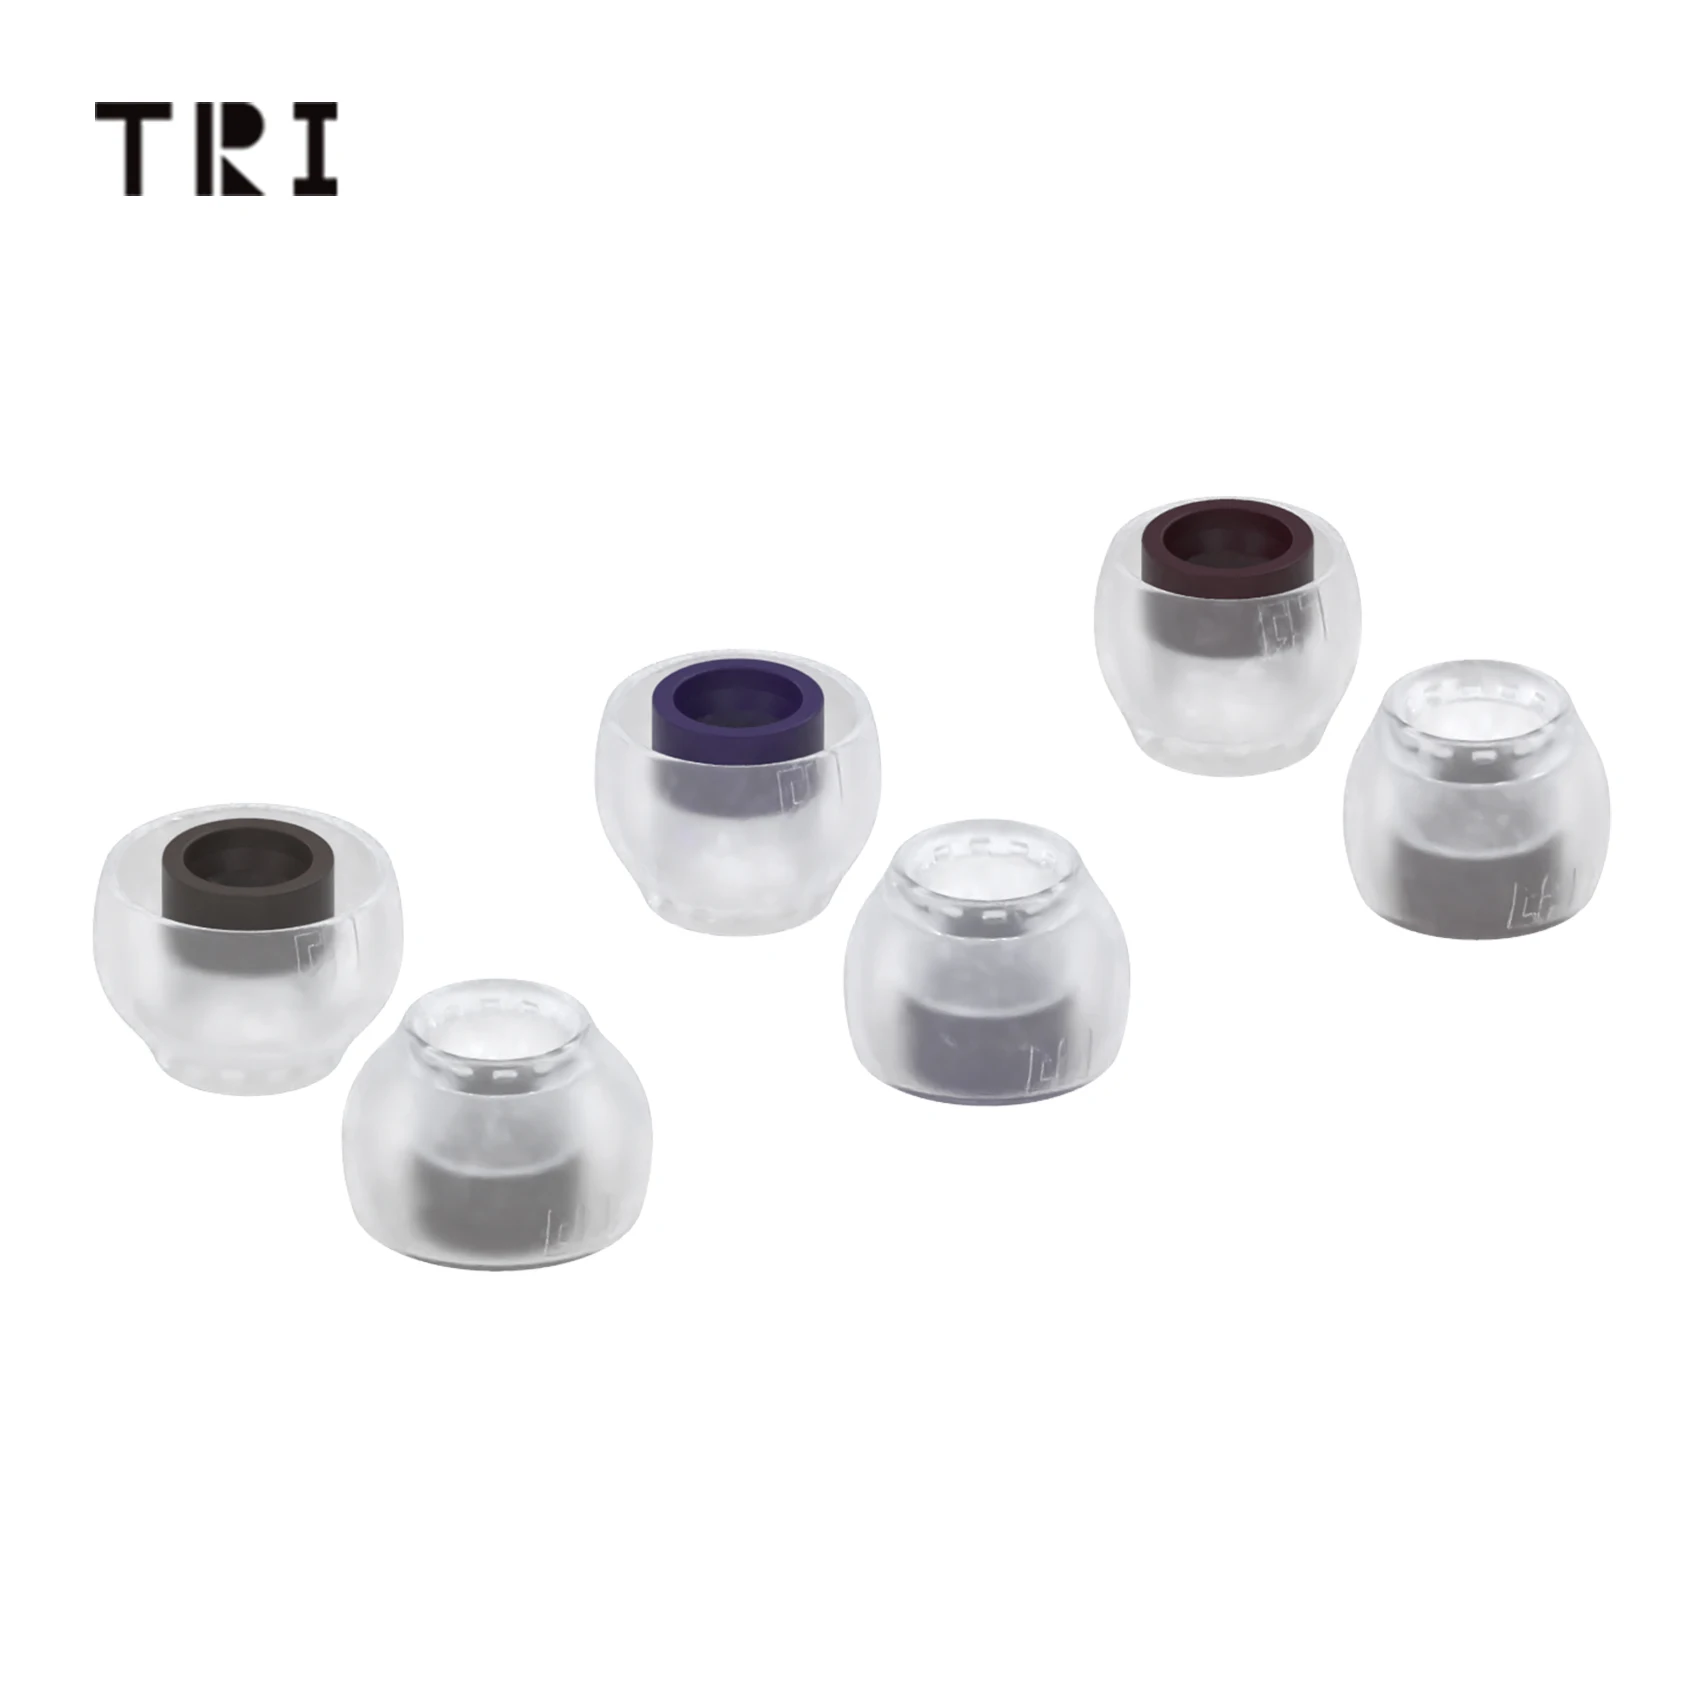 TRI Clarion Silicone Earphone Eartips 3 Pairs for S/M/L Size Headphone Accessory Wired Headset Earbuds TRI x HBB KAI I3 Pro IEM